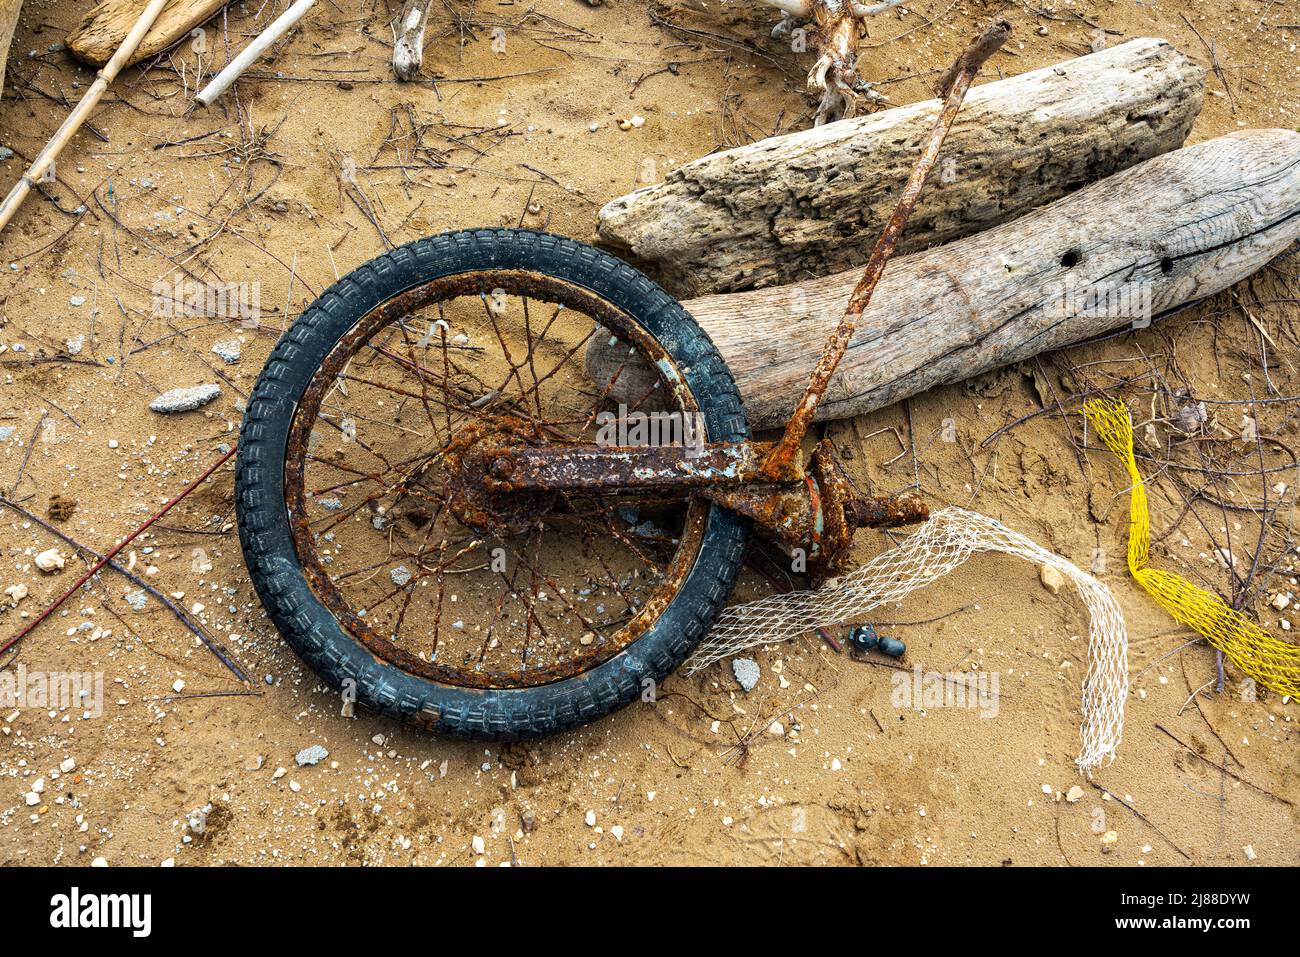 Remains of a rusty bicycle and trunks brought to the beach by the storm. Puglia, Italy, Europe Stock Photo